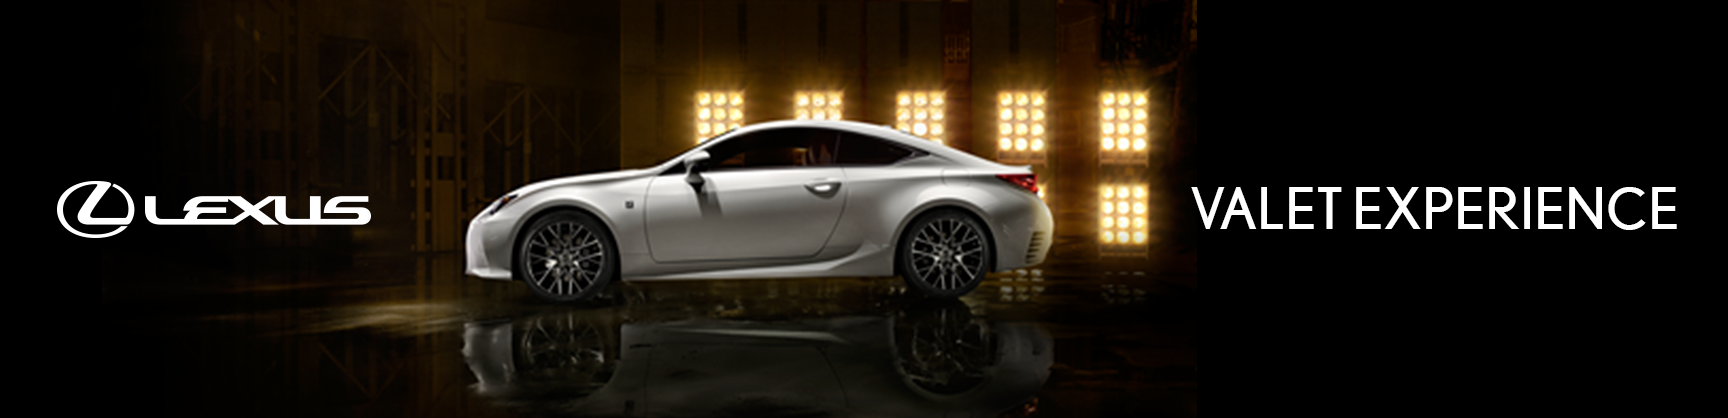 lexus-signup-page-header-1728x418.png